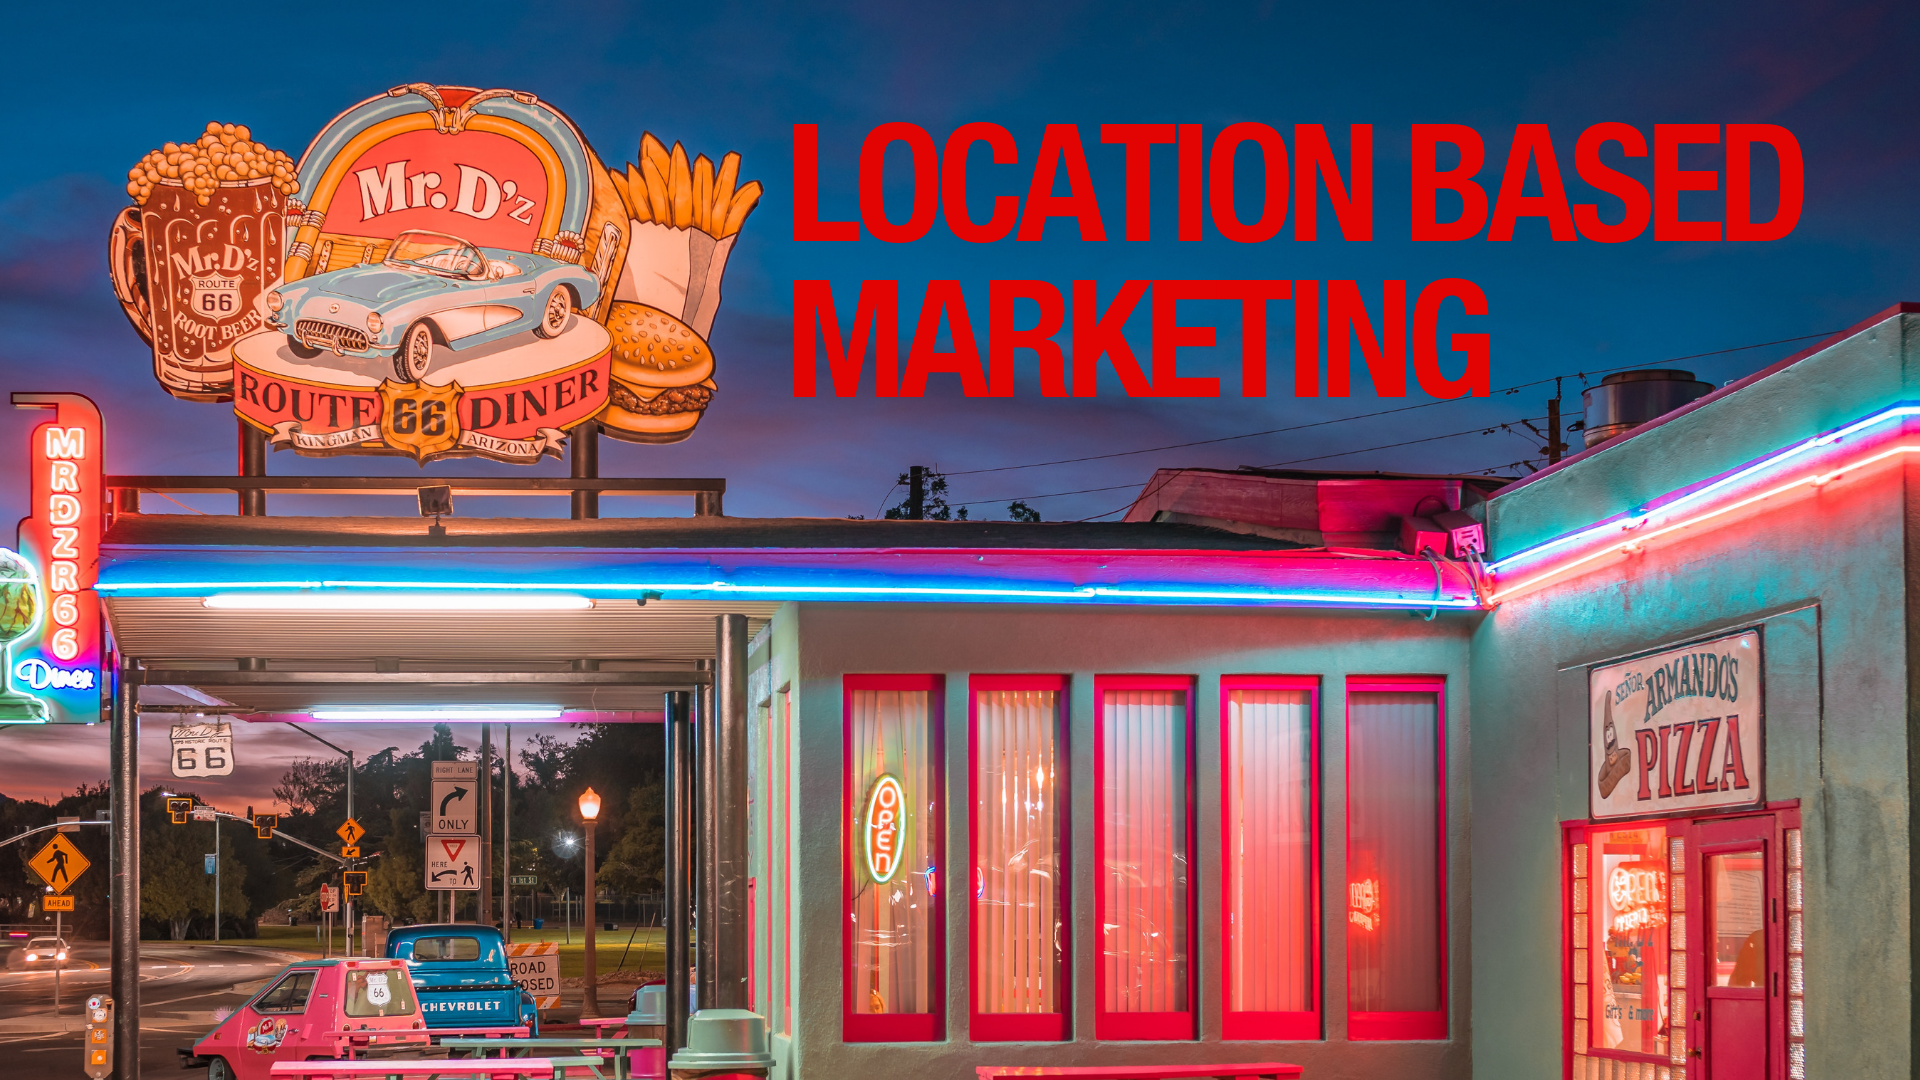 Canned Heat Podcast Episode 9: Location Based Marketing with David Ciancio